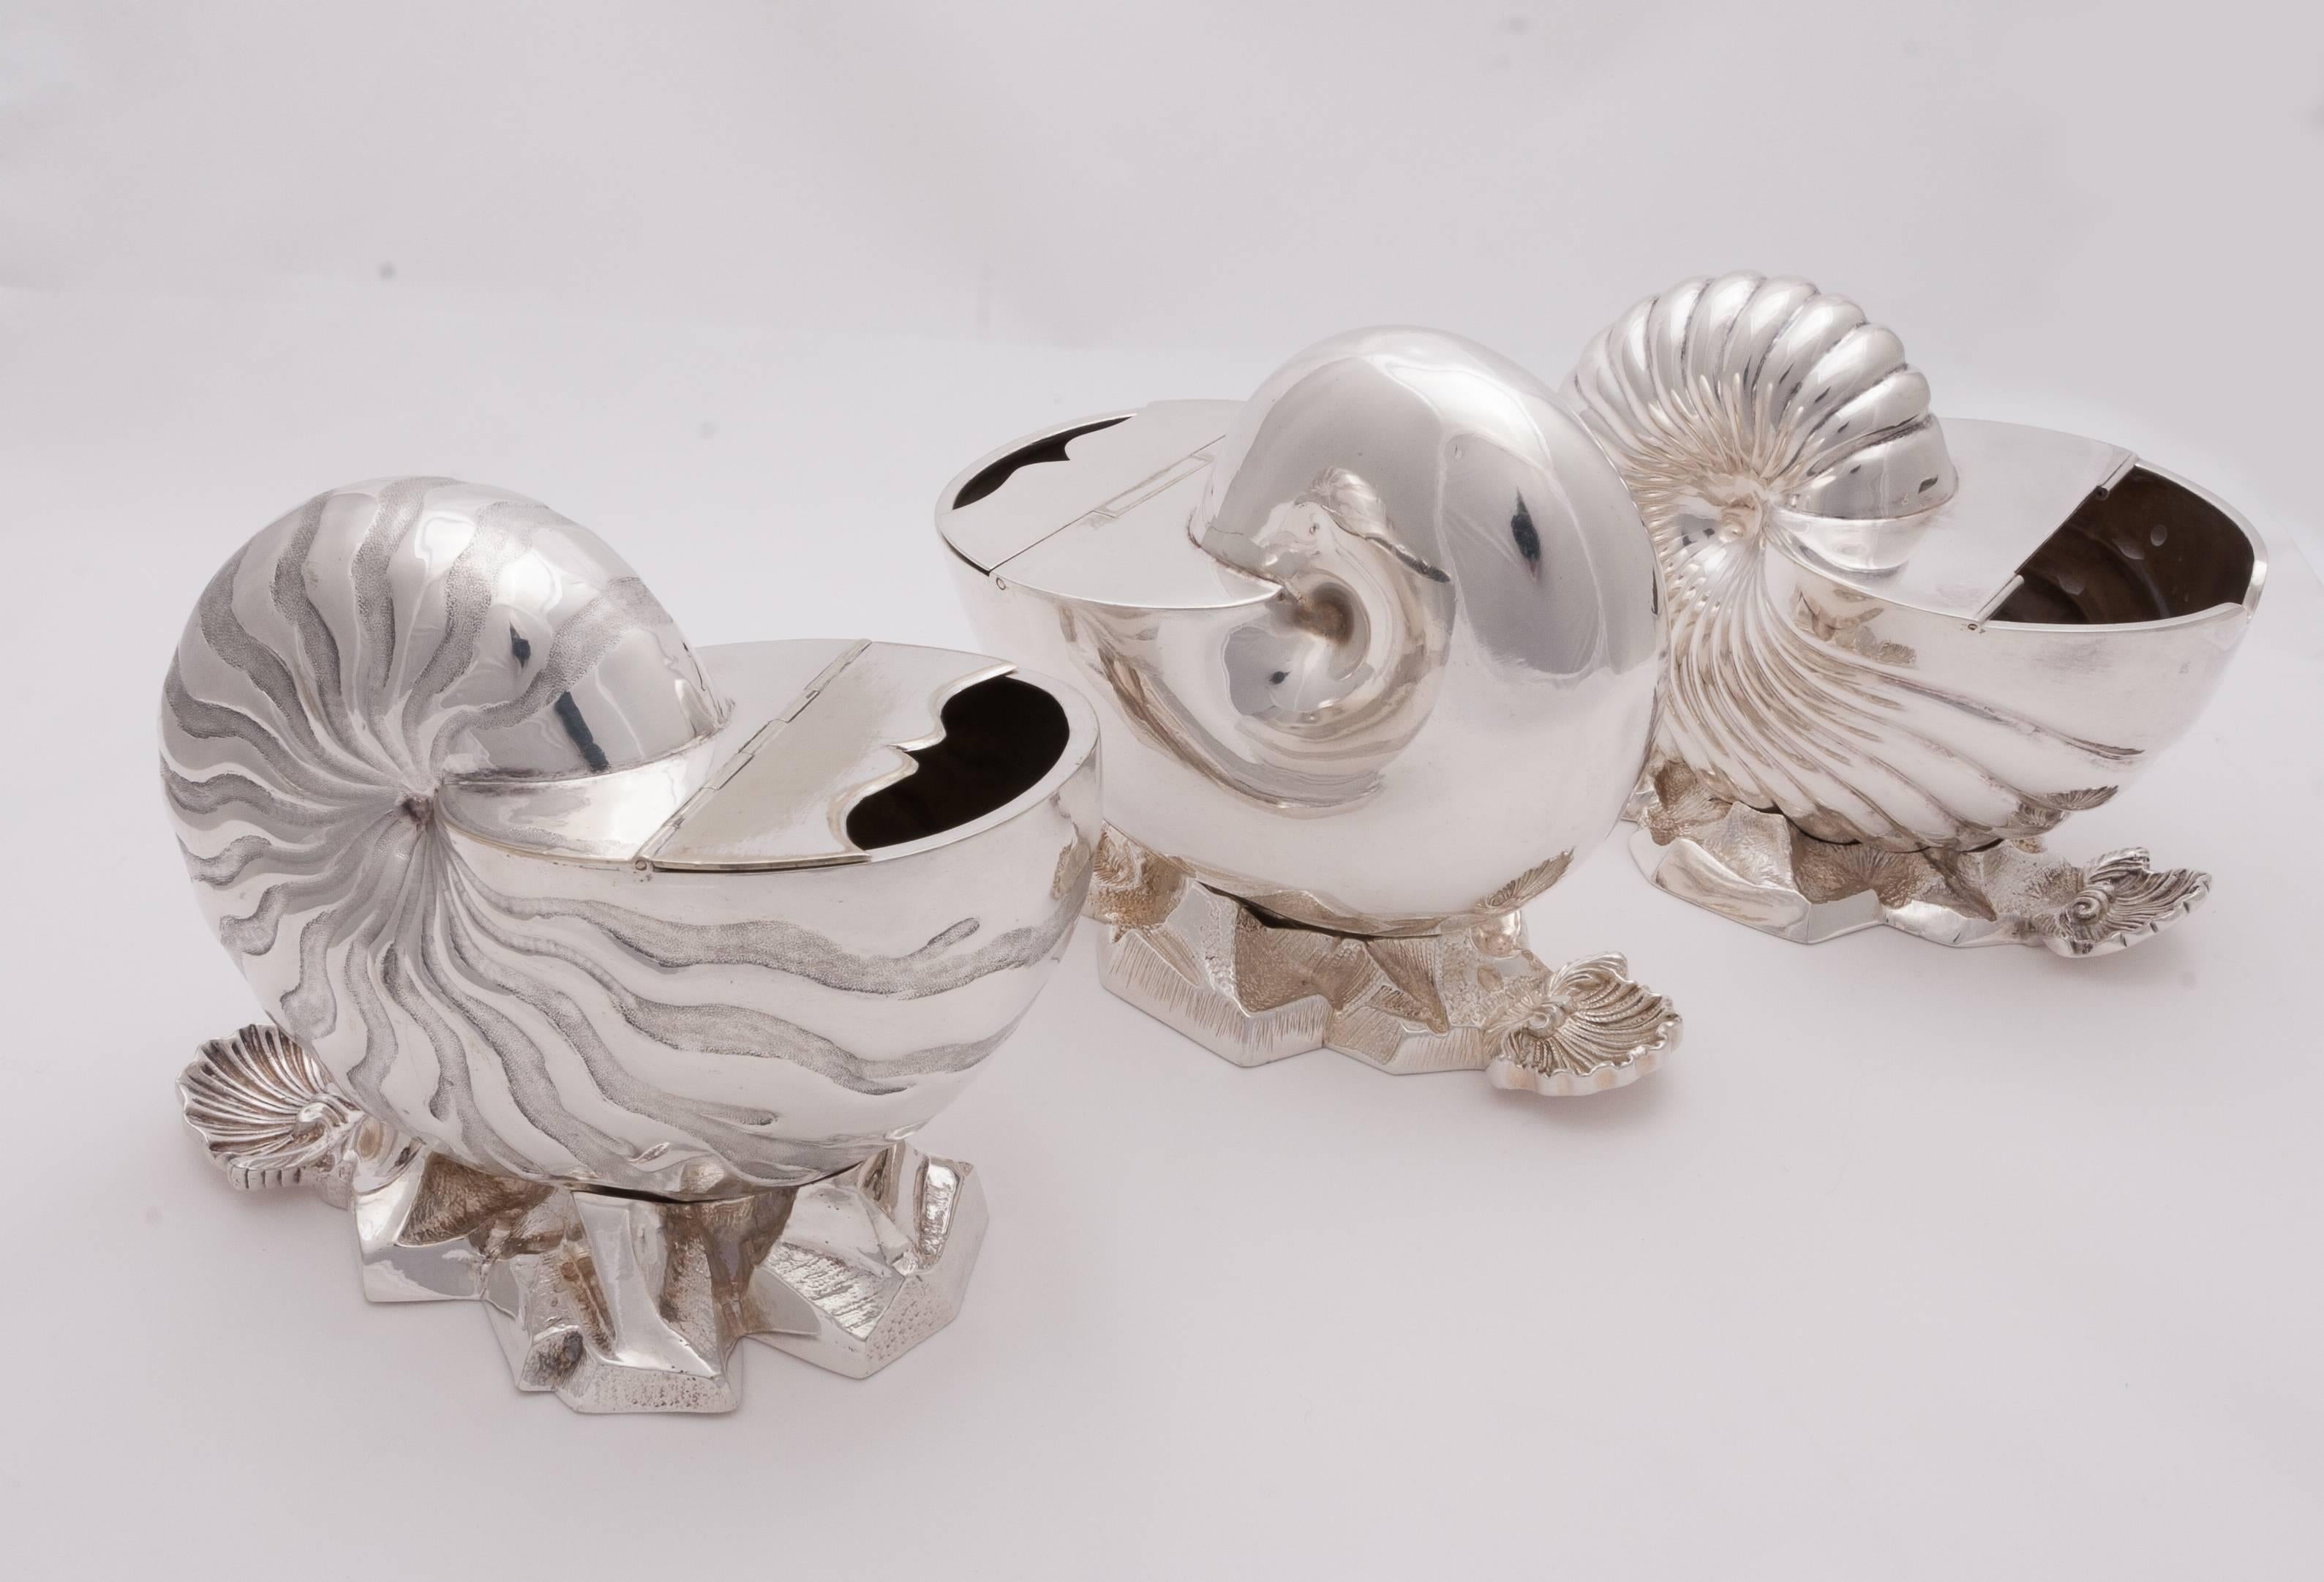 This is a beautiful collection of three English Victorian silver spoon warmers in shell form on naturalistic base. Please inquire if you would be interested in purchasing separately instead of a collection.